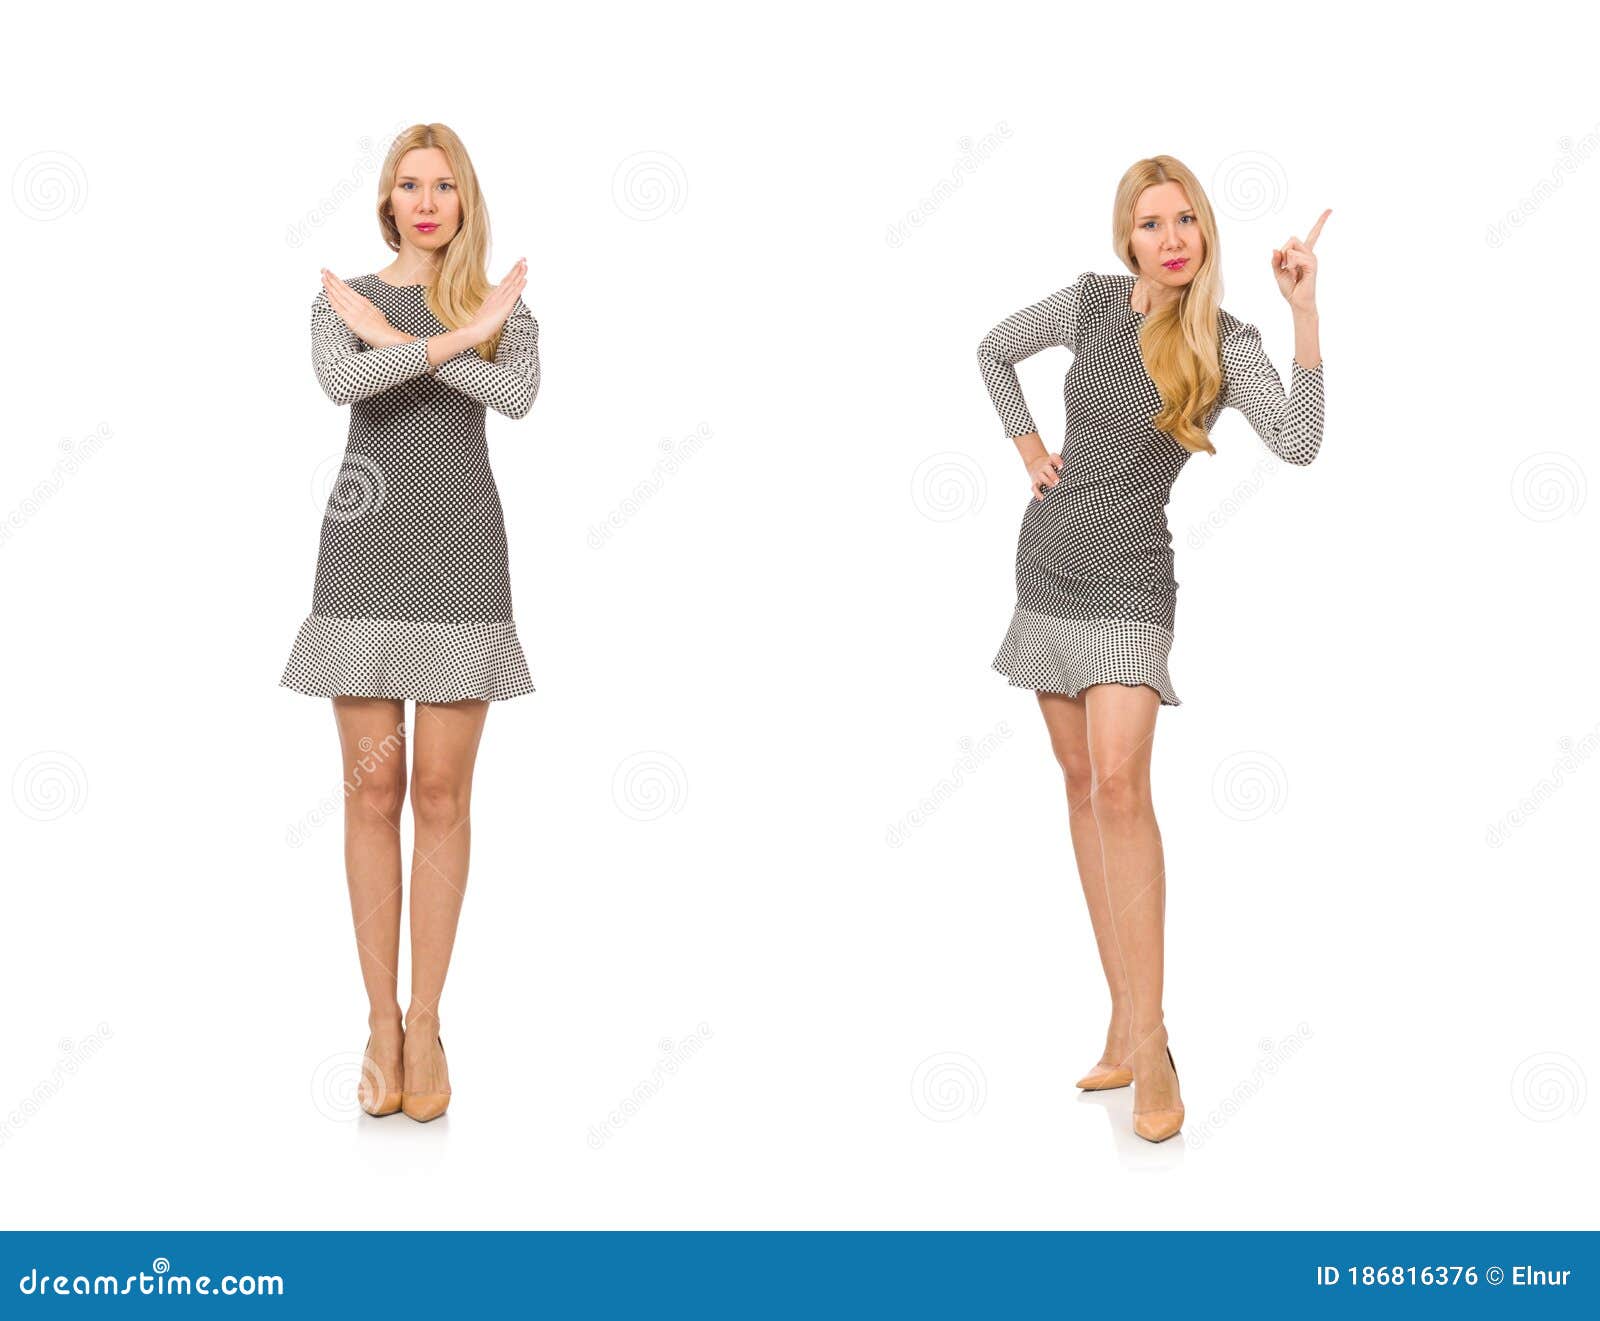 Blond Girl in Polka Dot Dress Isolated on White Stock Photo - Image of ...